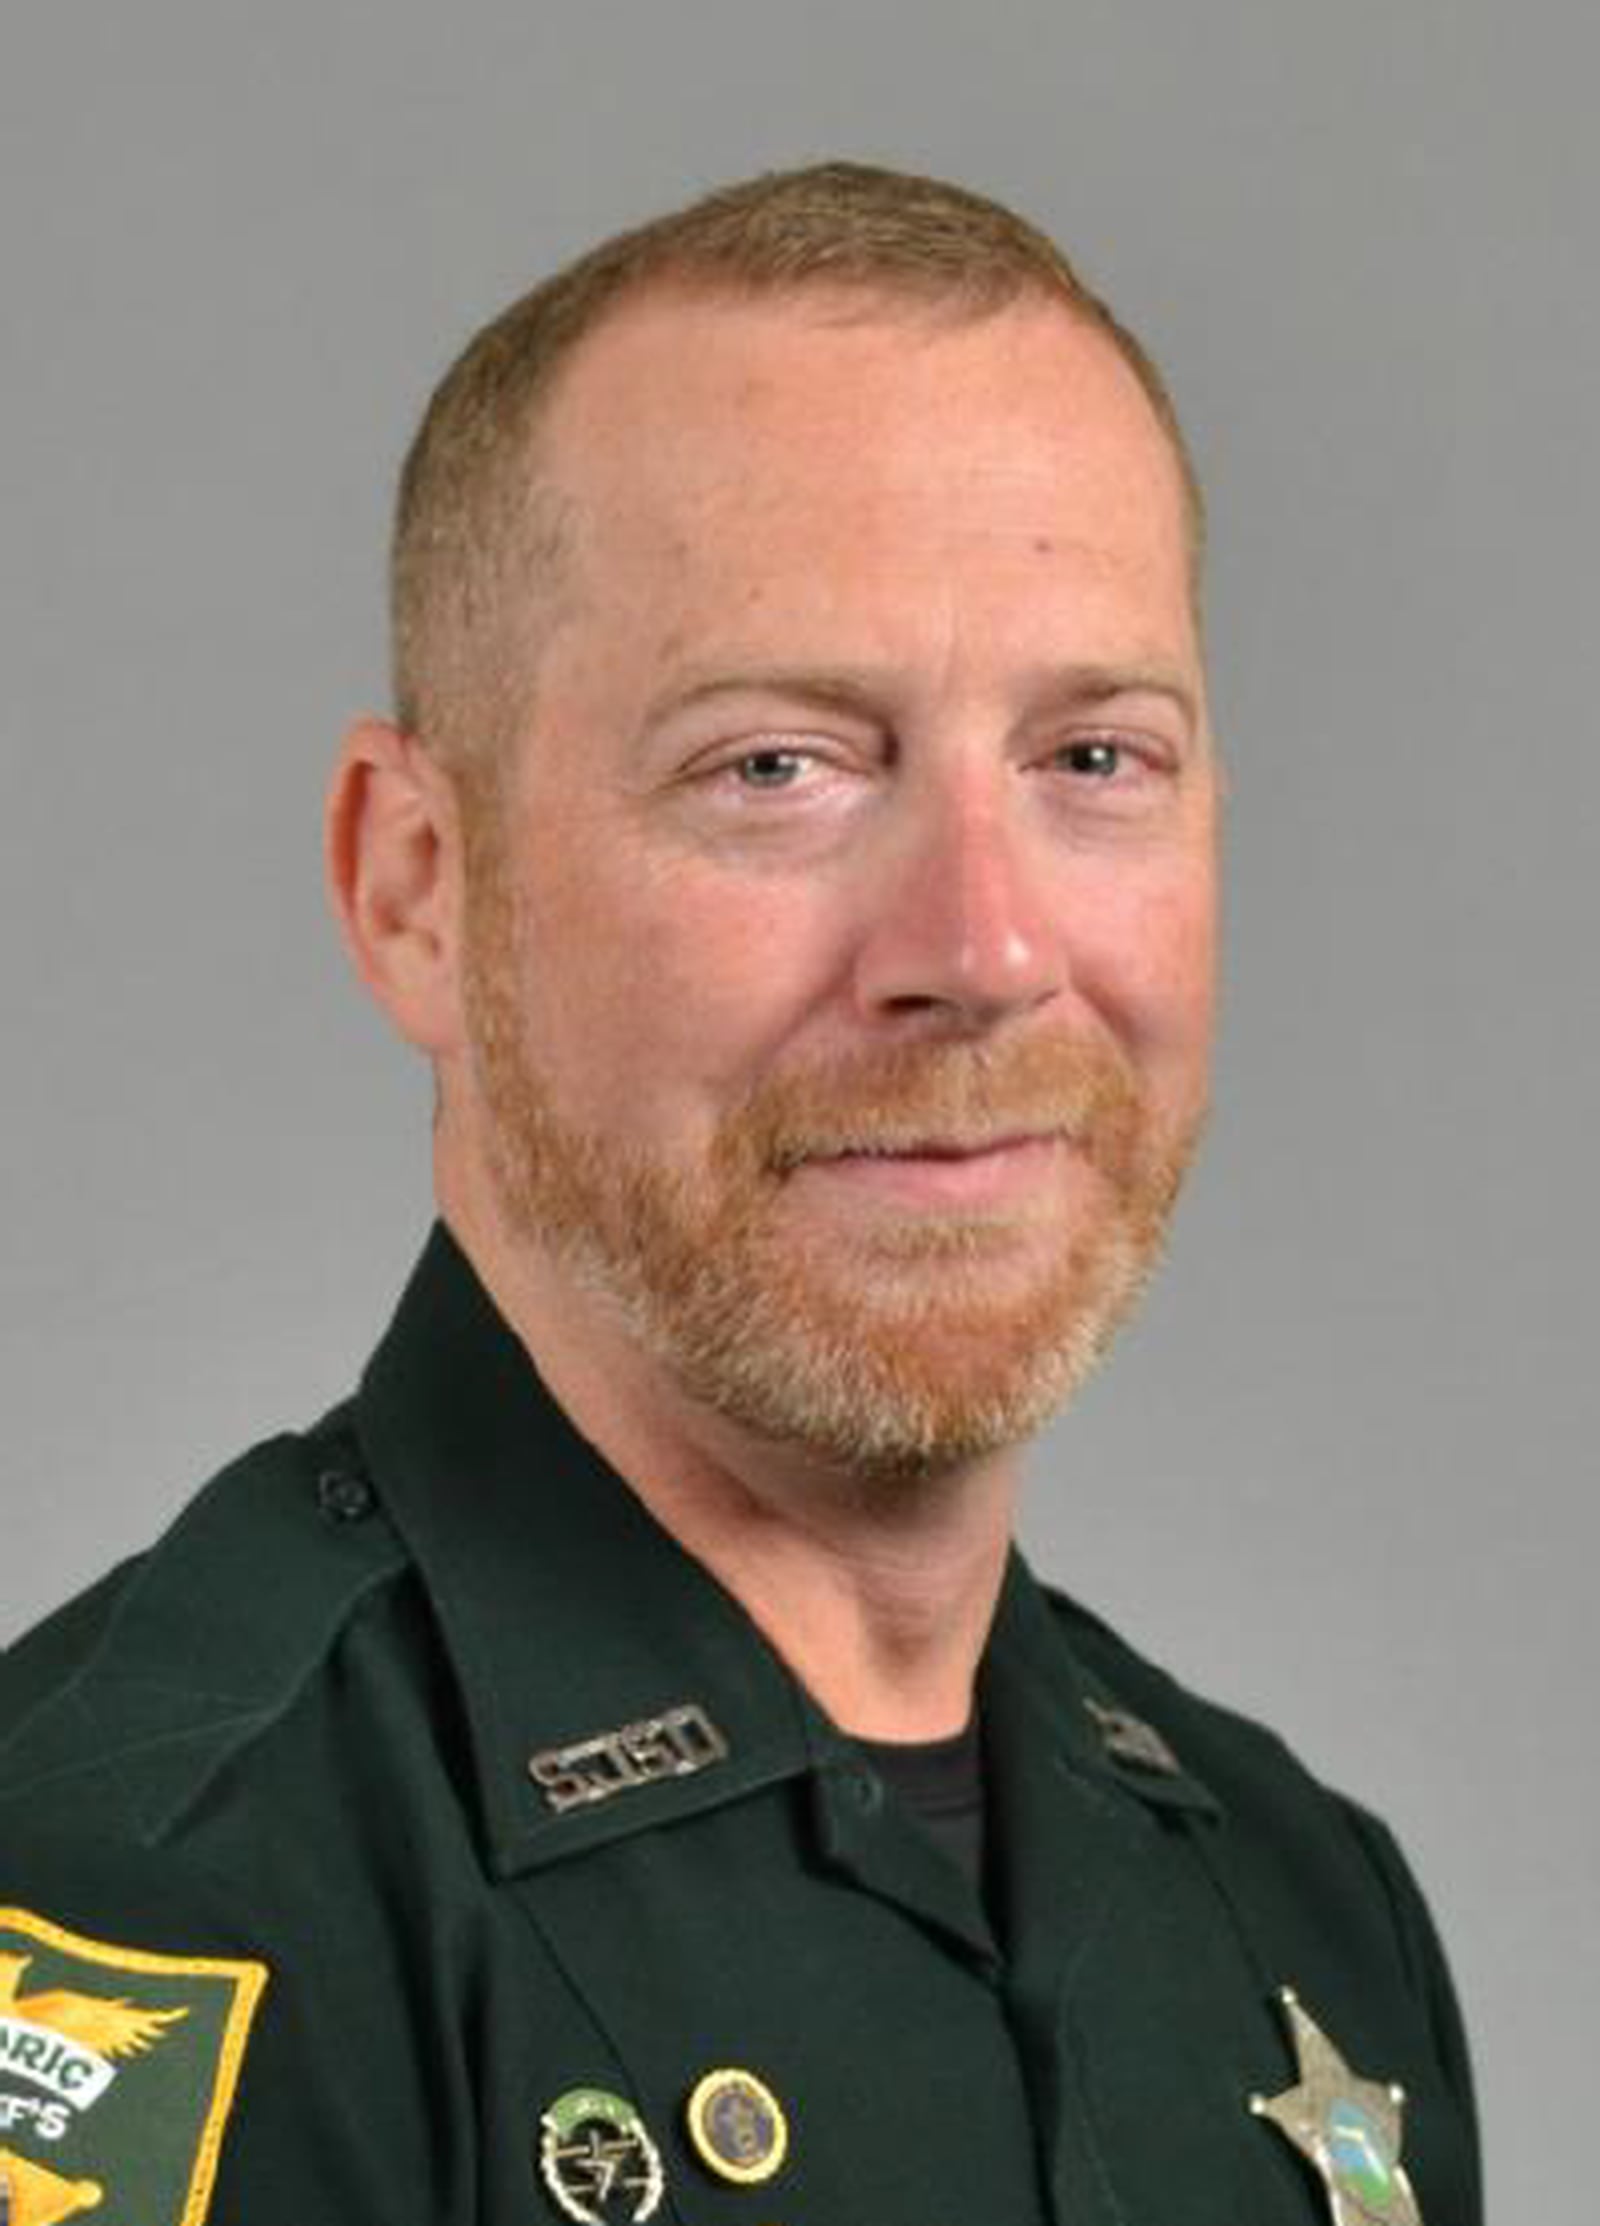 St Johns County Sheriff s Office announces unexpected passing of